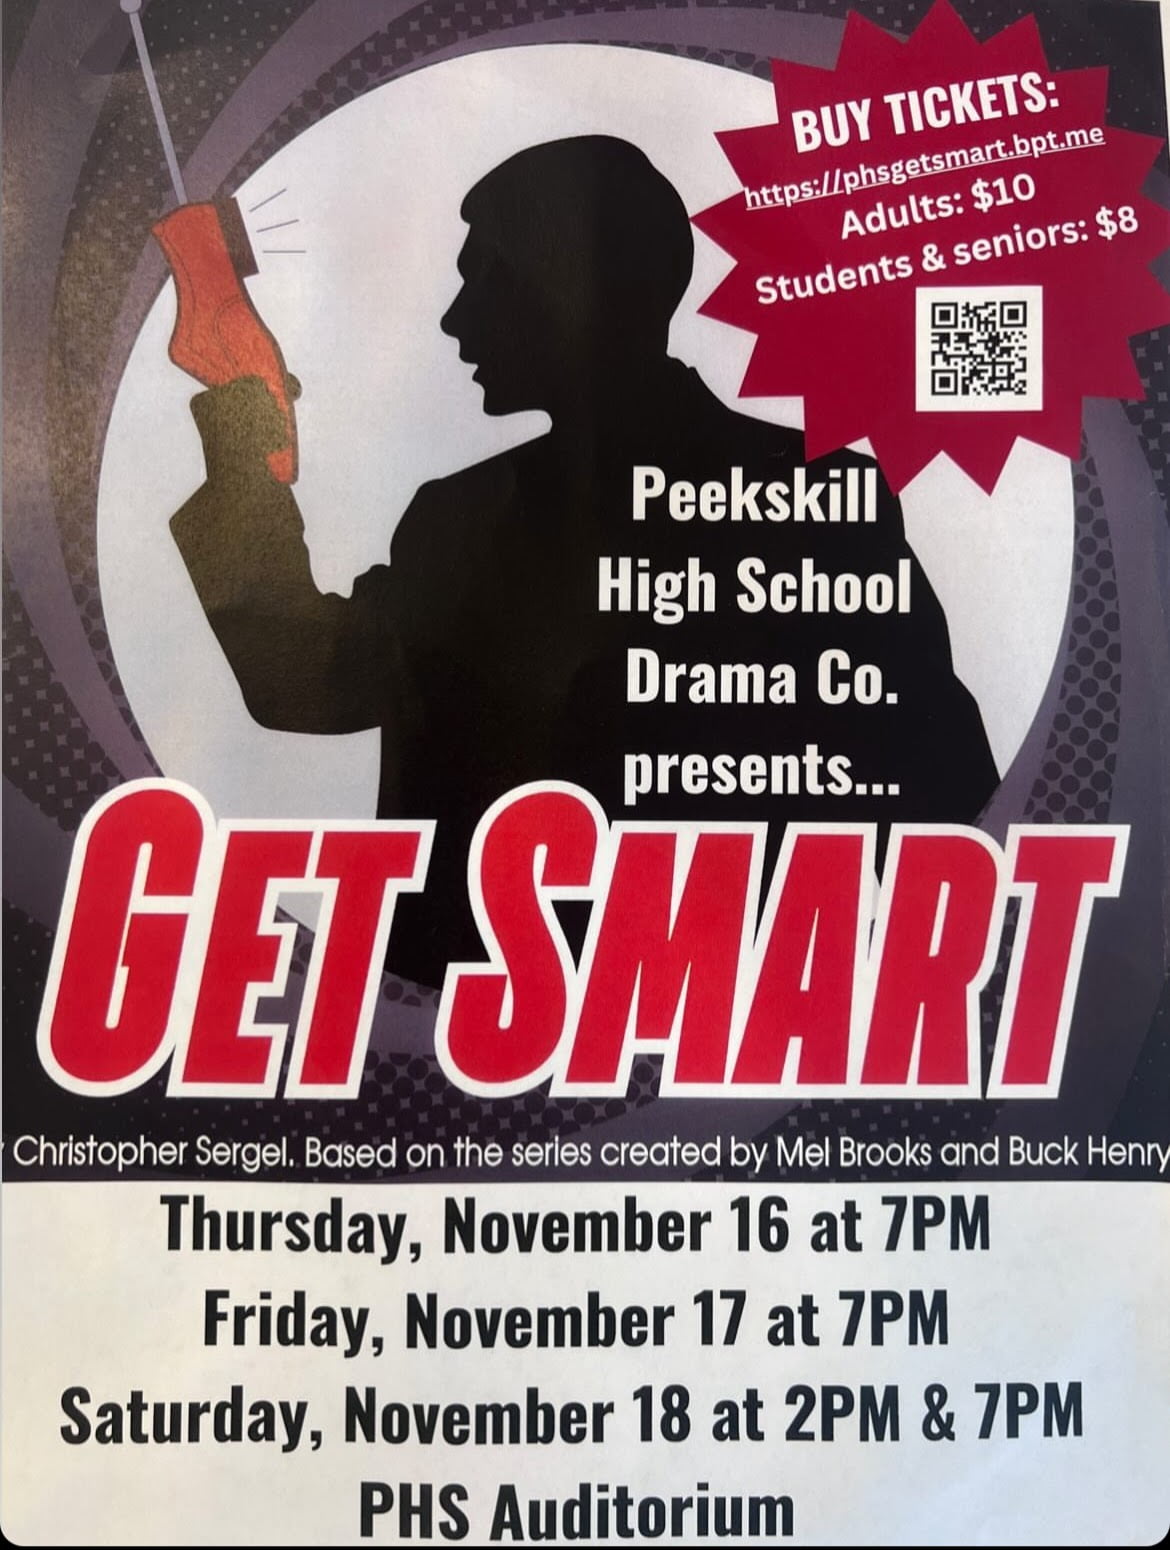 Flyer for "Get Smart" by the Peekskill High Schiik Drama Club